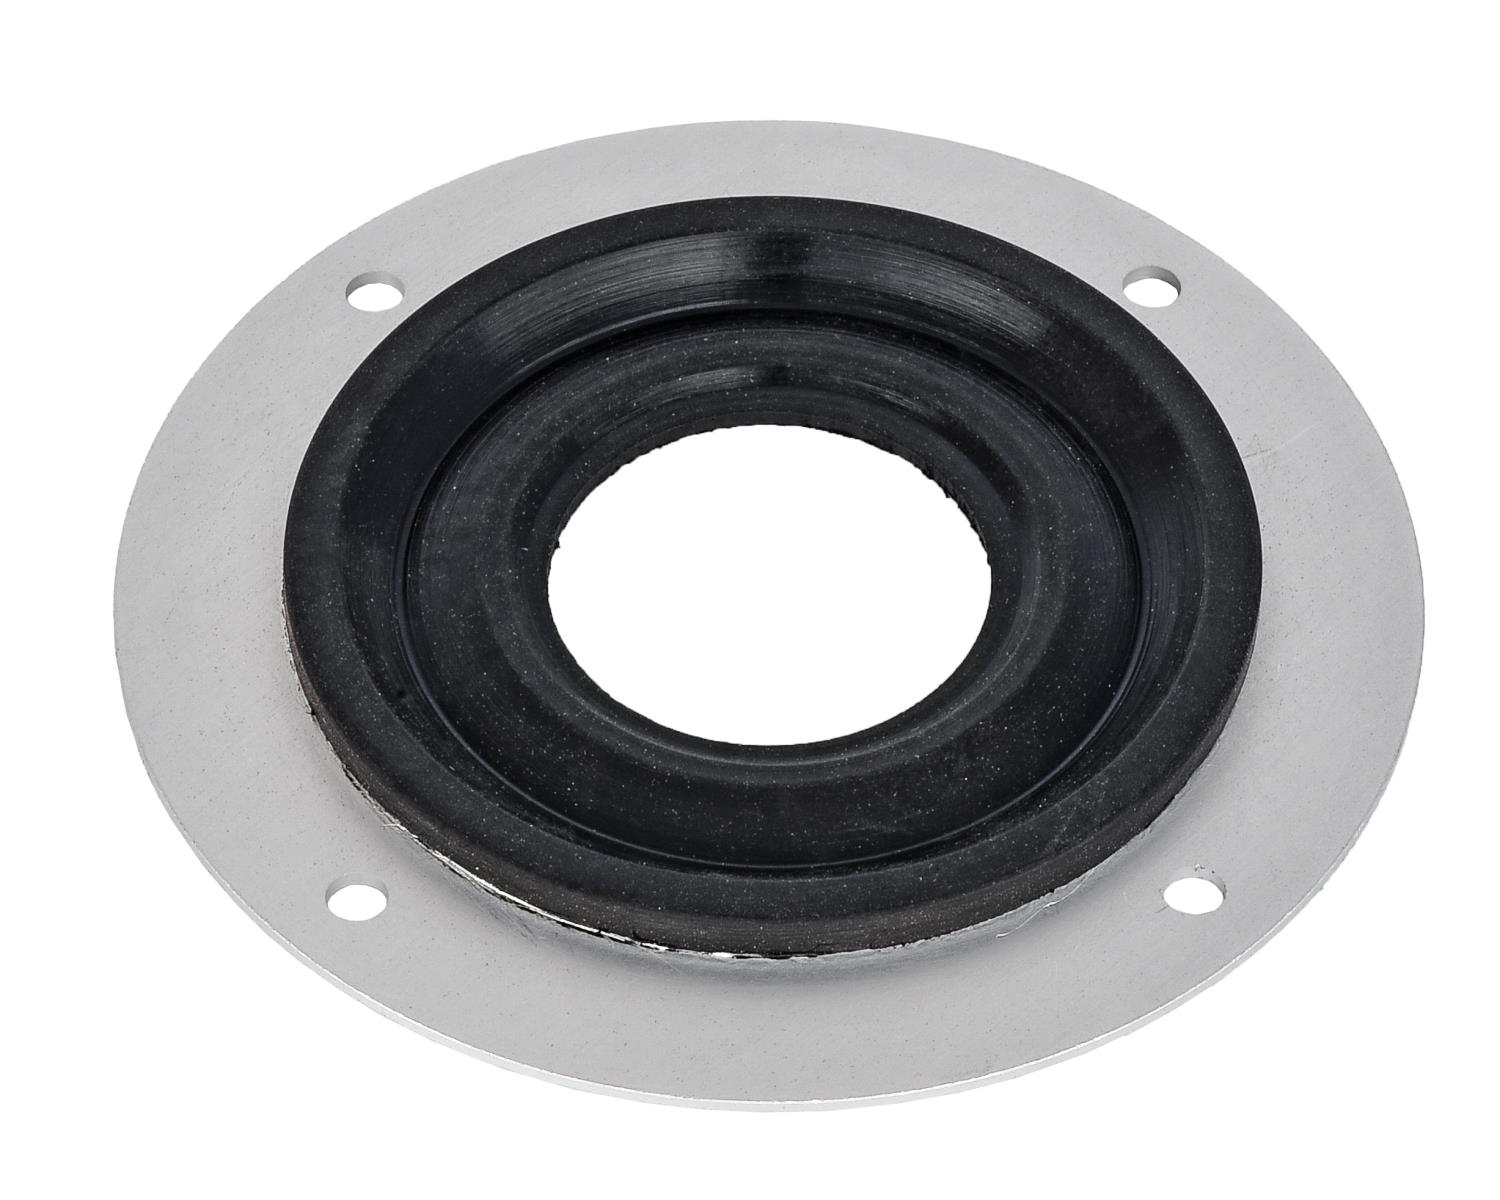 Firewall Grommet Seal, 1-Piece Flat Style [1 in. I.D. Hole]